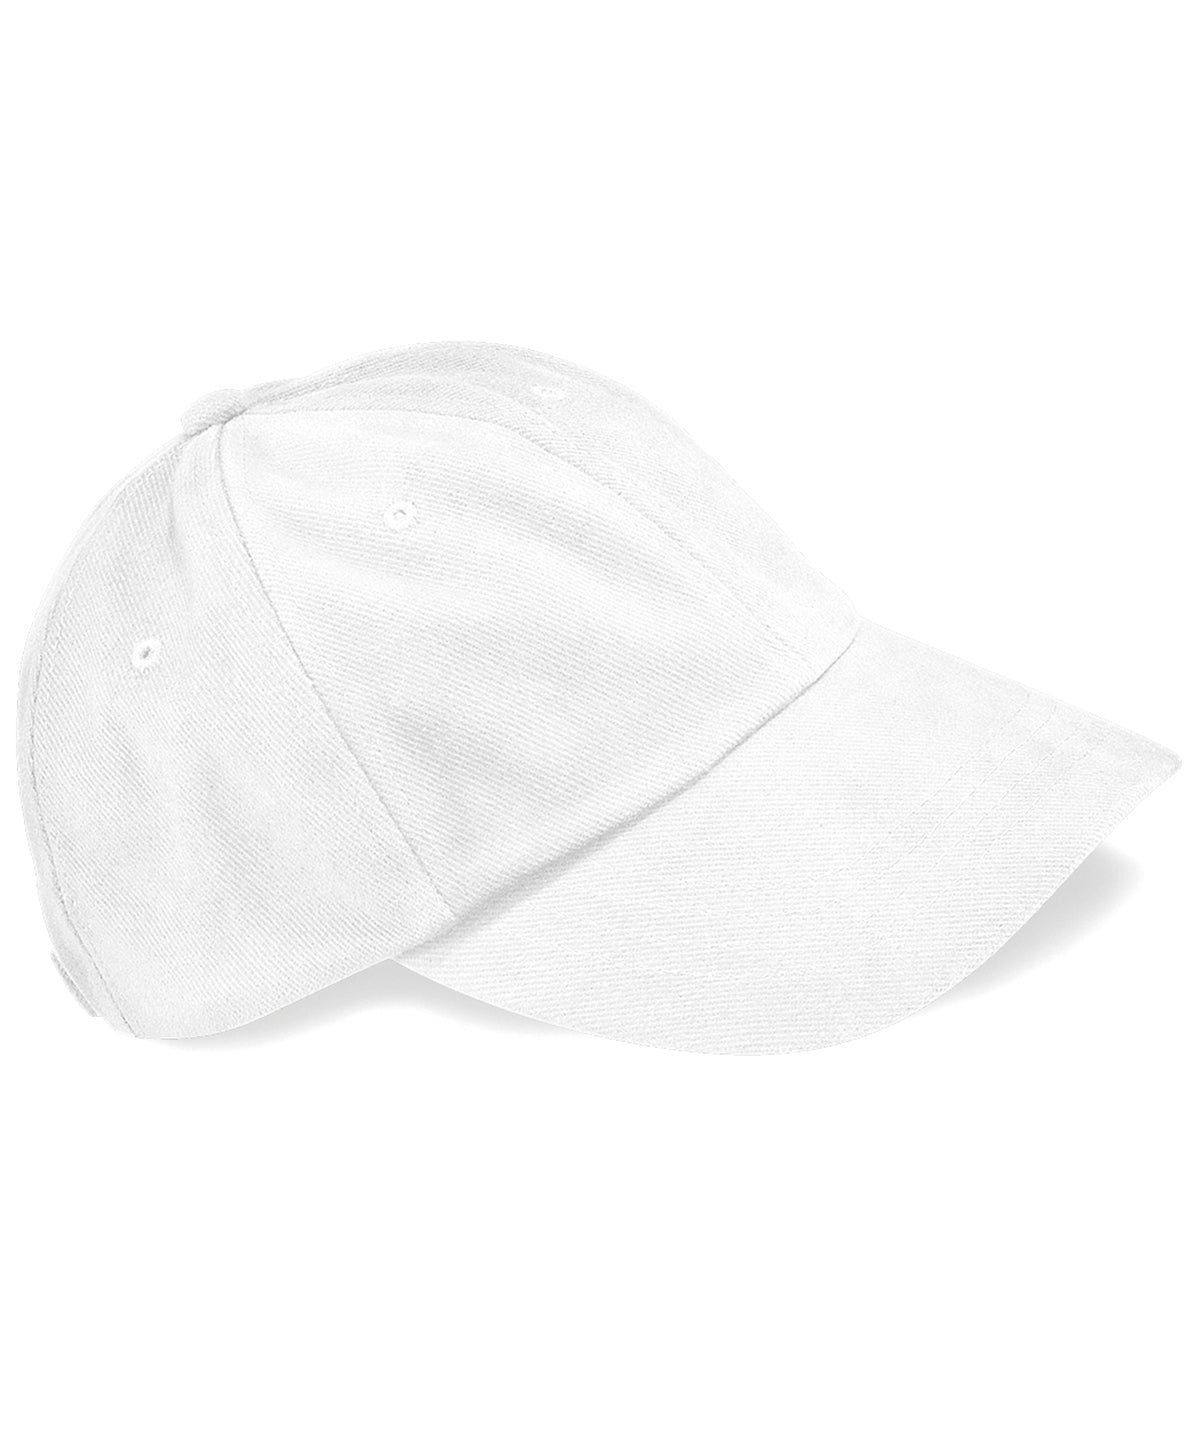 Personalised Caps - White Beechfield Low-profile heavy brushed cotton cap